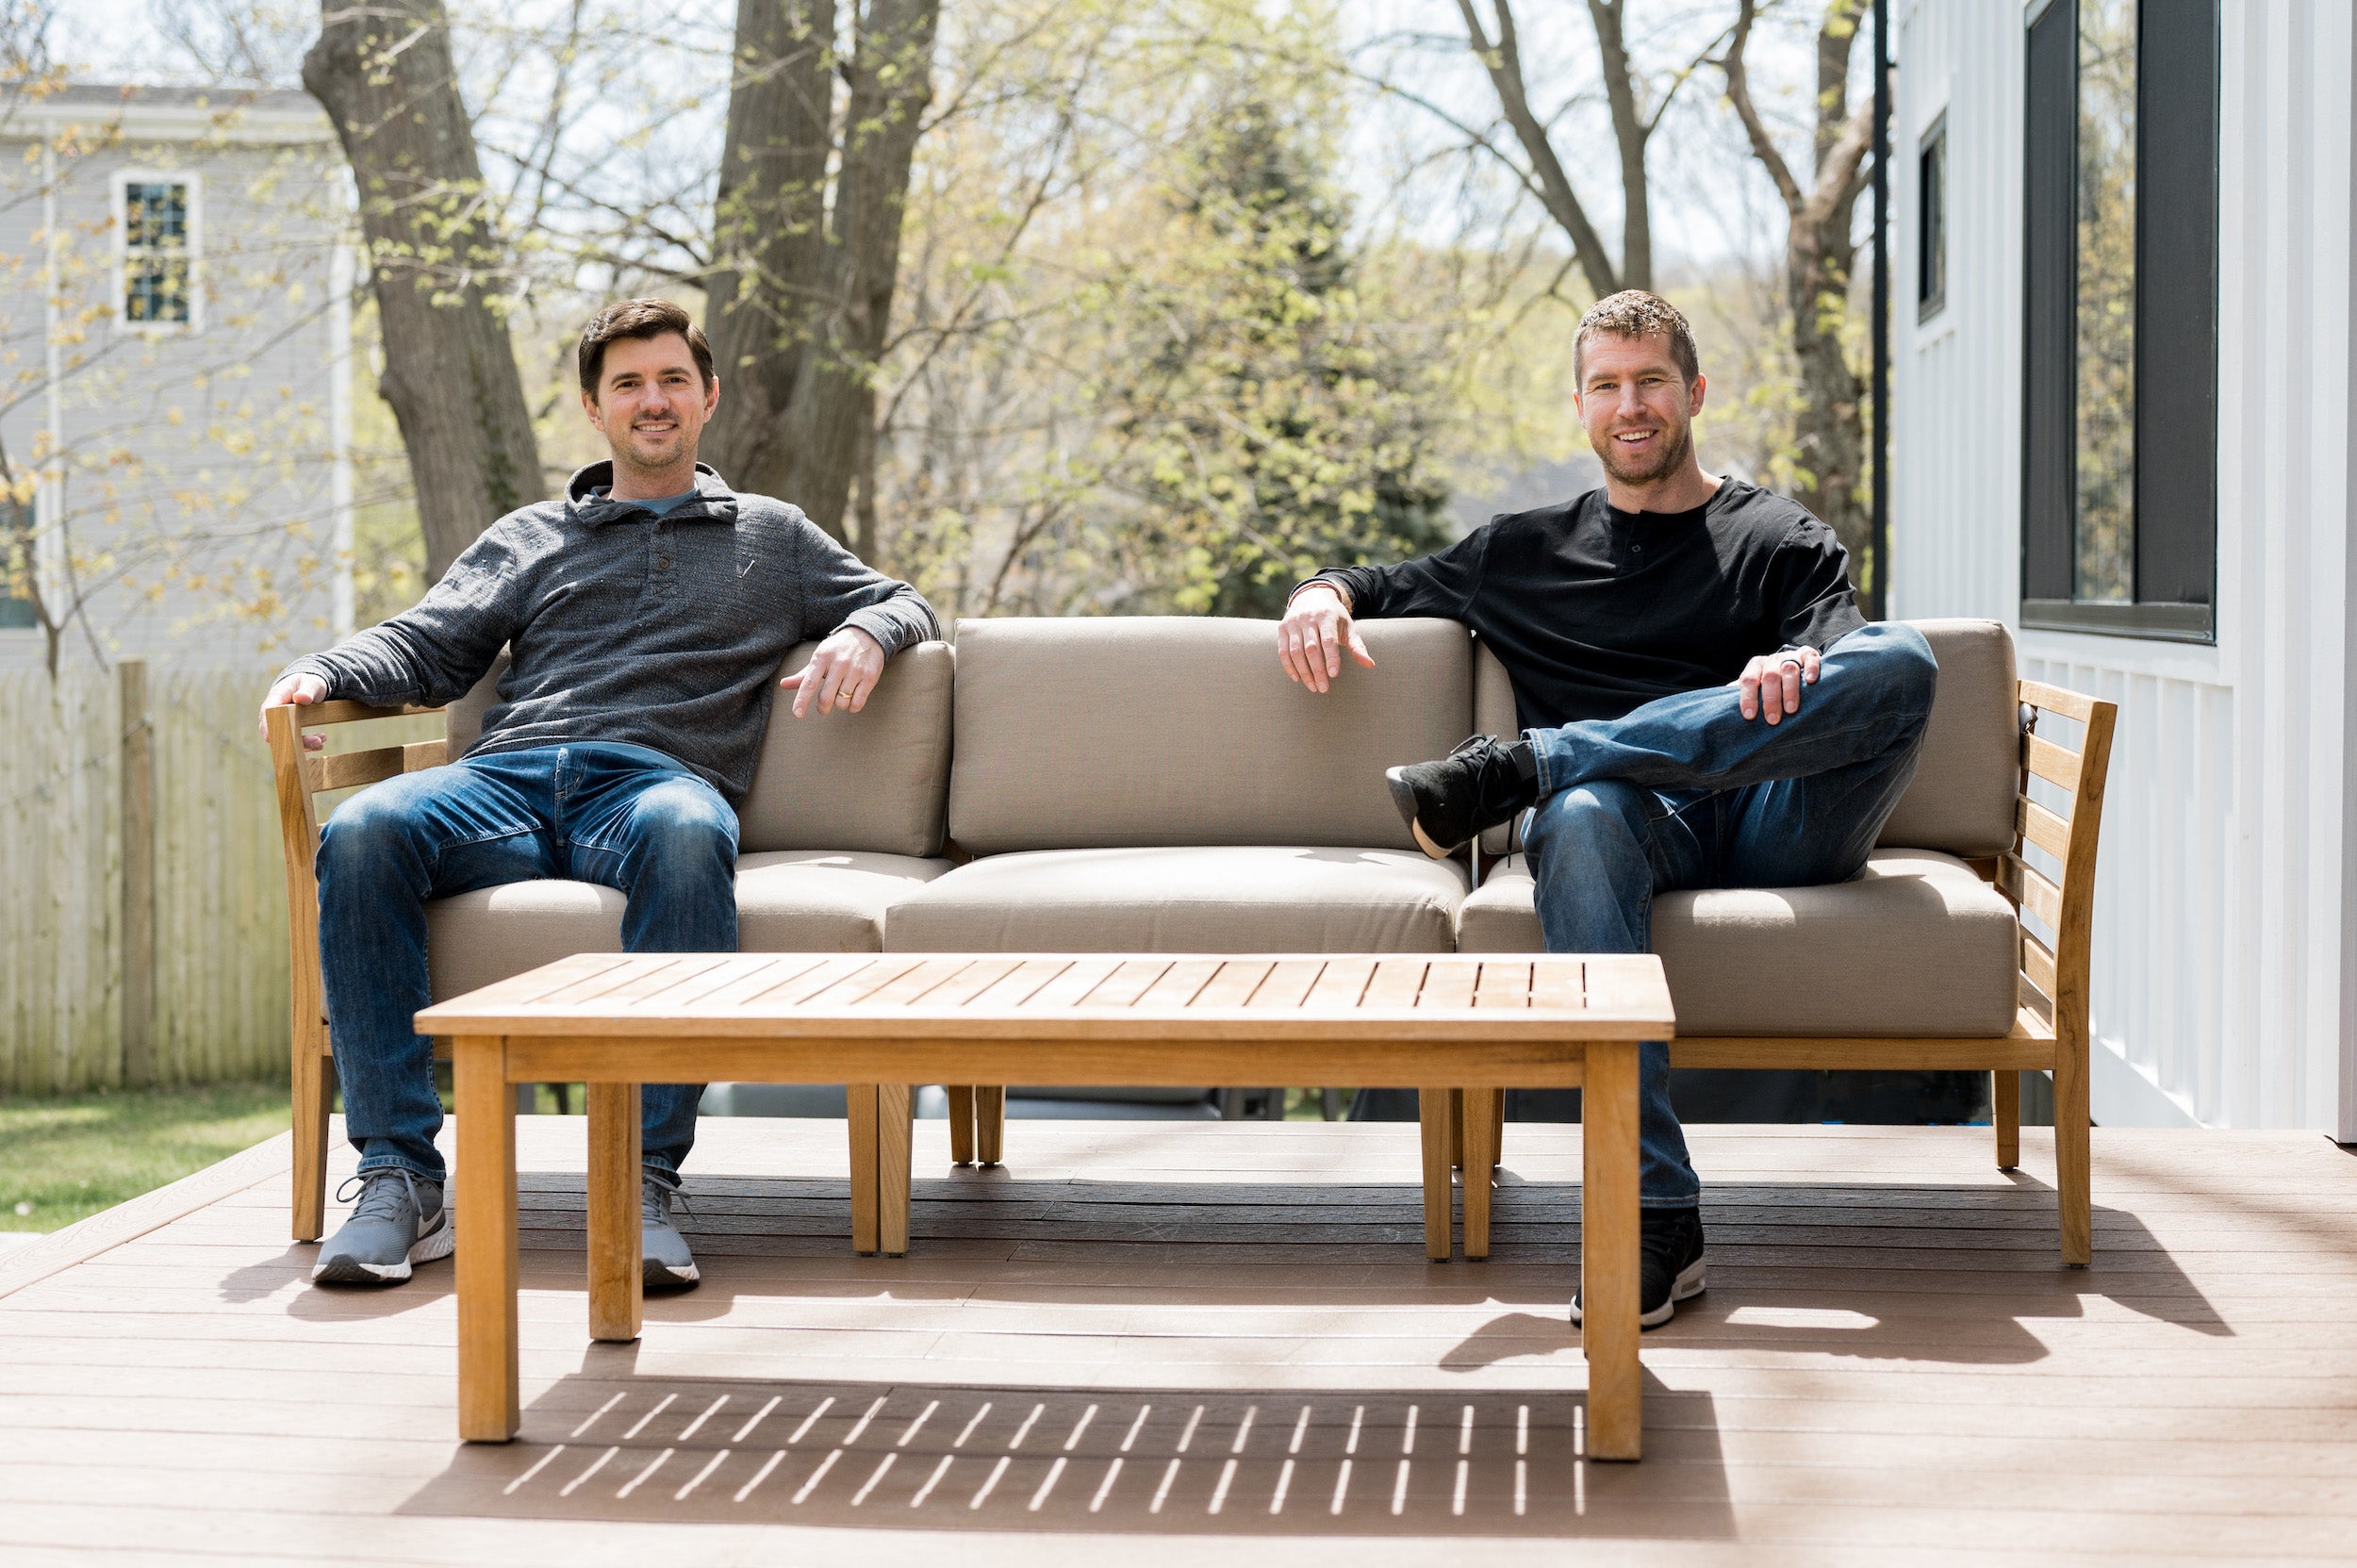 Outdoor Furniture Company Co-Founders Tim and Brady on Bali Outdoor Sofa